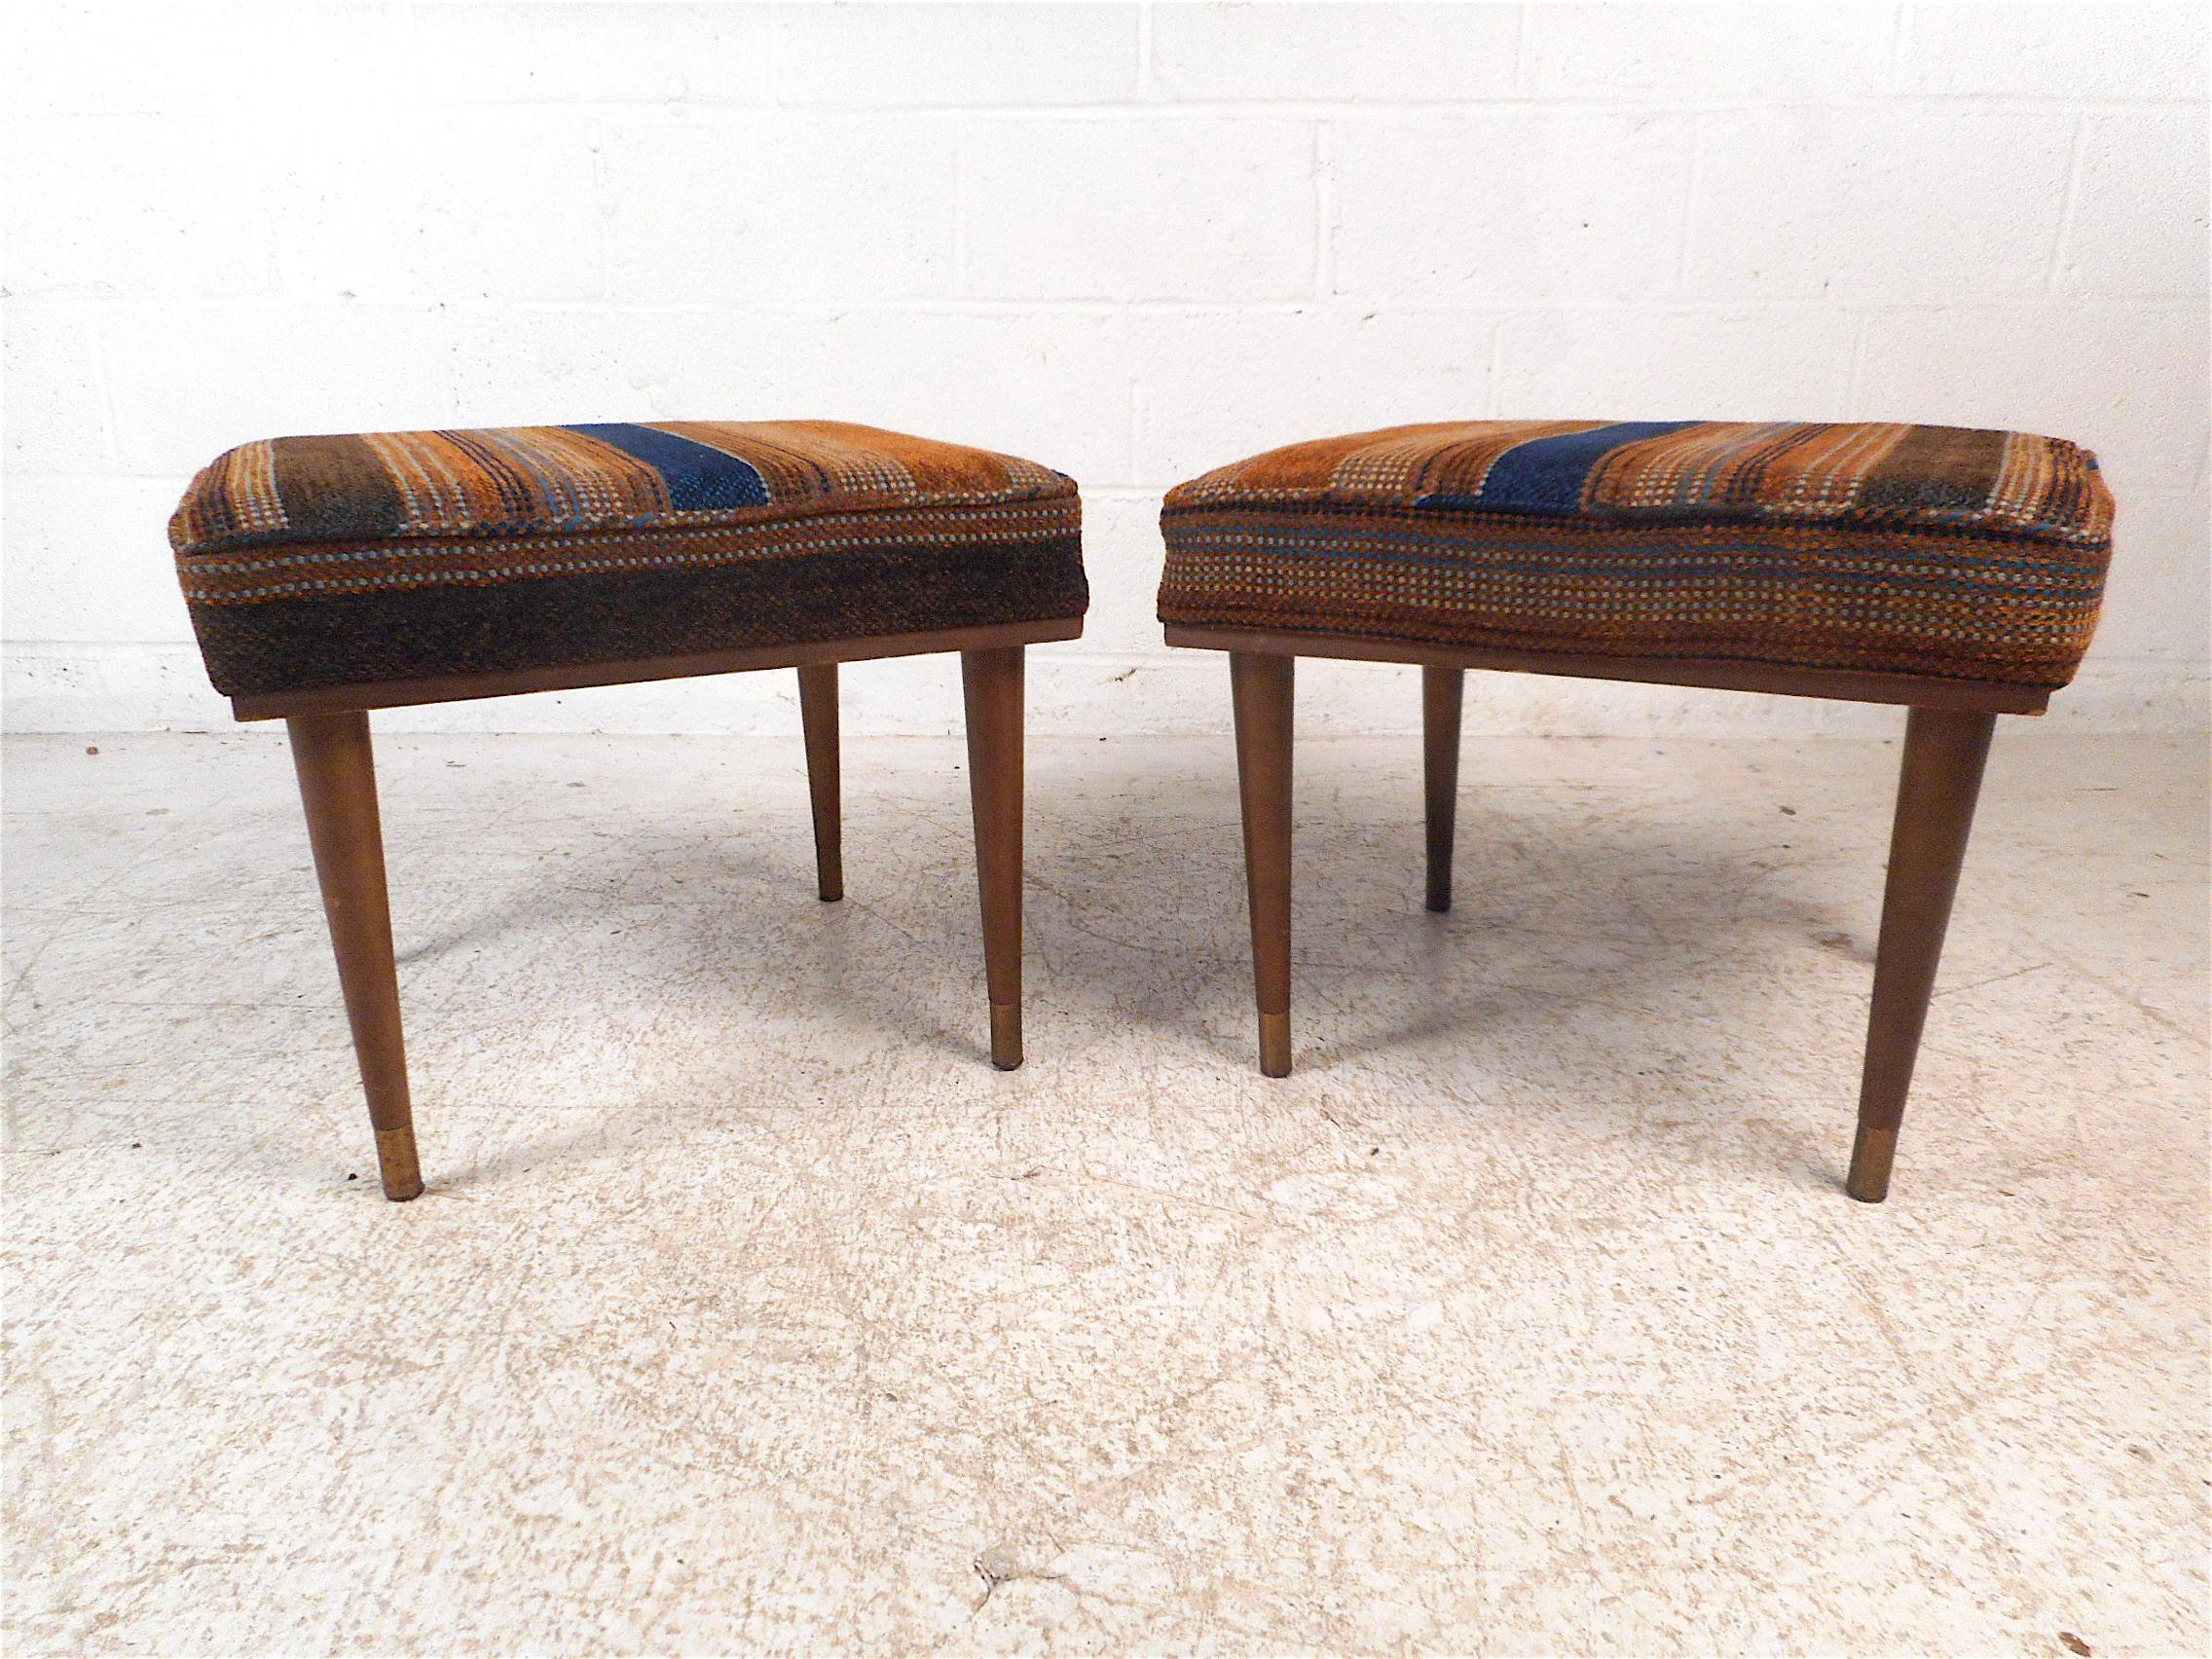 Stylish pair of midcentury ottomans. Tapered wooden legs with brass accents at the base, cushions covered in a vintage striped upholstery. Great addition to any modern interior. Please confirm item location with dealer (NJ or NY).